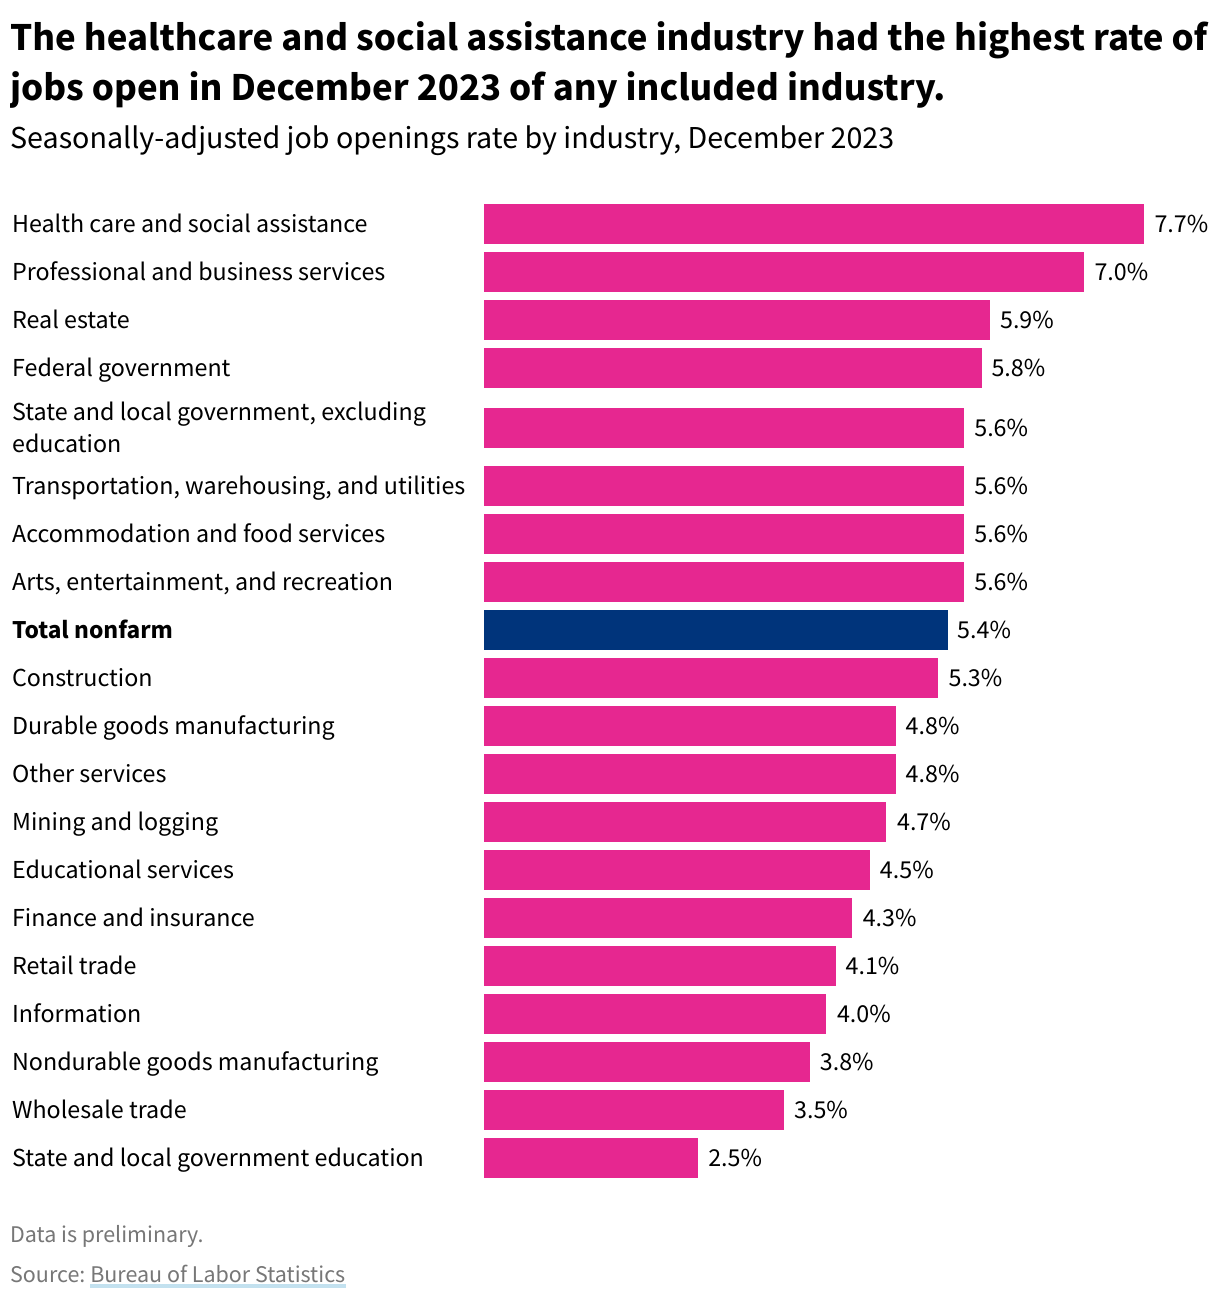 A bar chart showing job openings rate by industry in December 2023. Healthcare and social assistance had the highest rate at 7.3%.